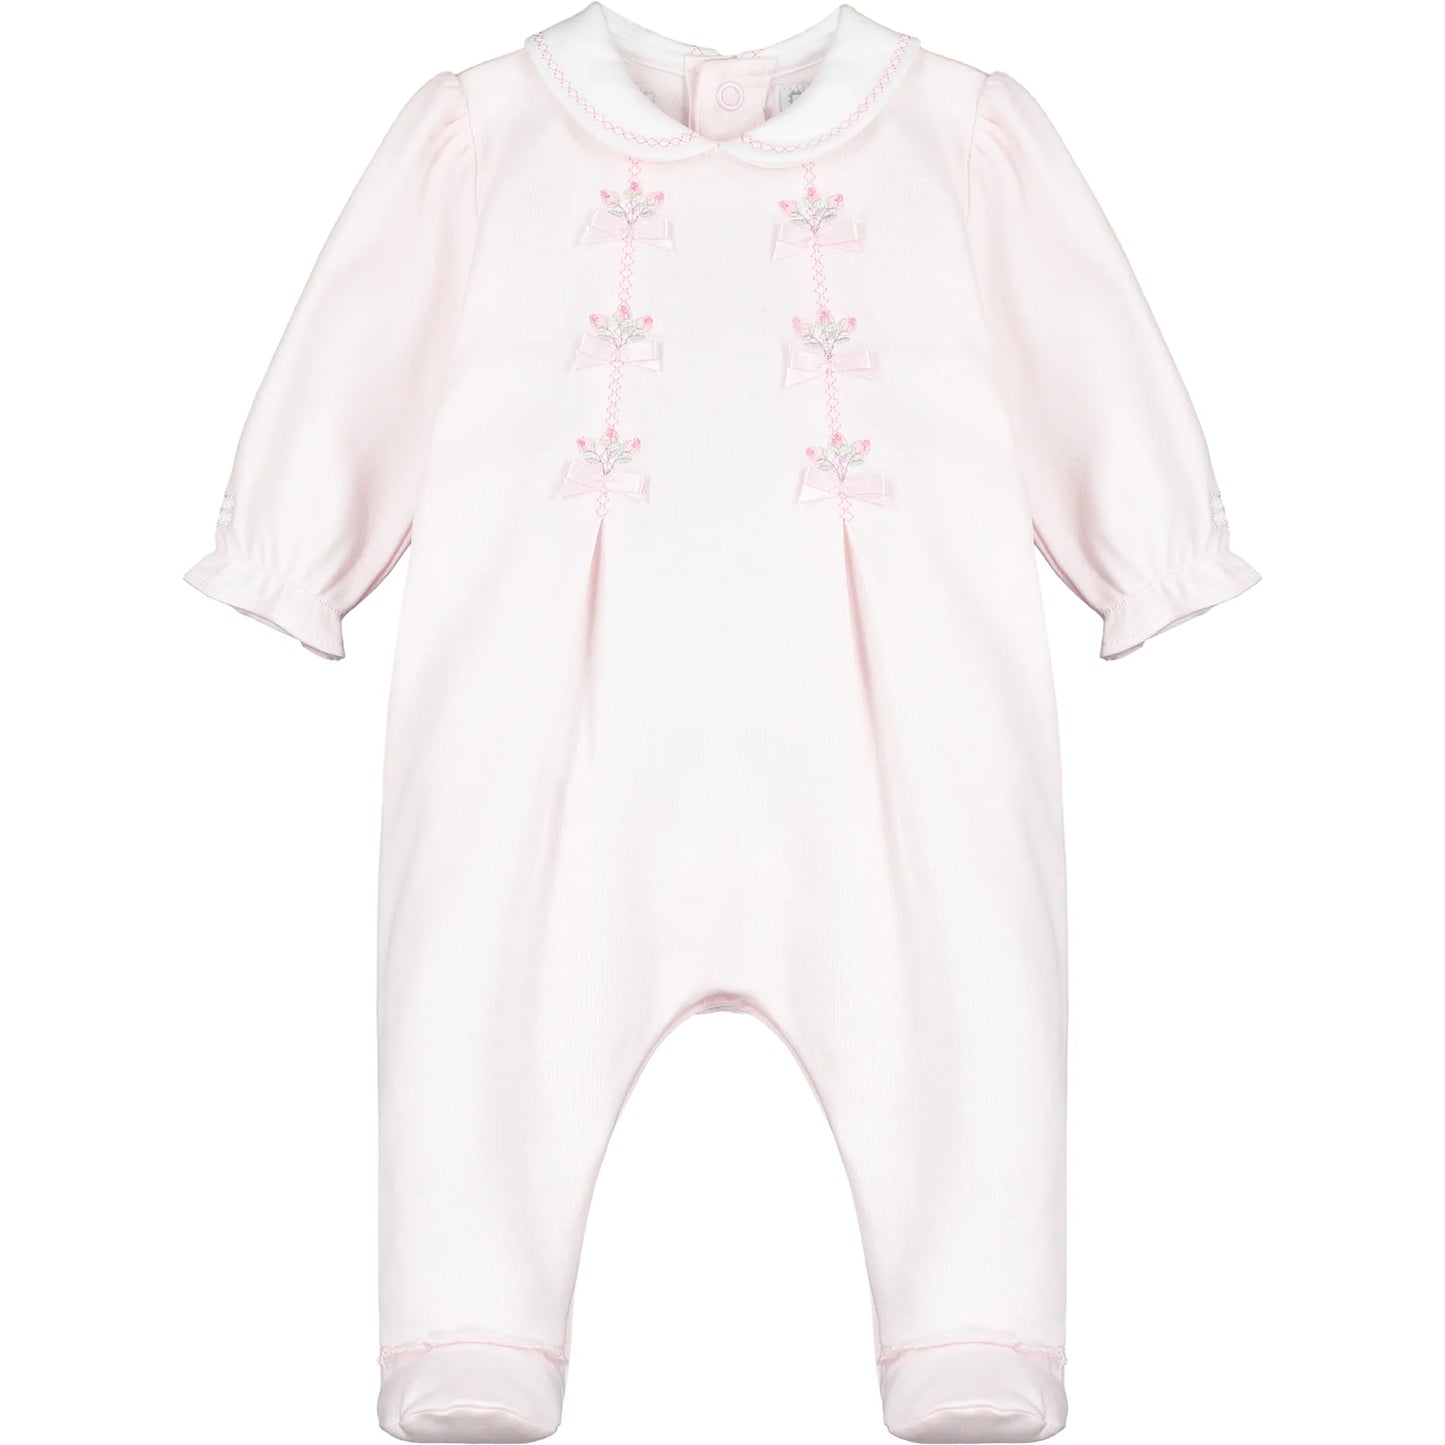 Emile et Rose Baby Girl's Pale Pink Embroidered Babygrow With Bows